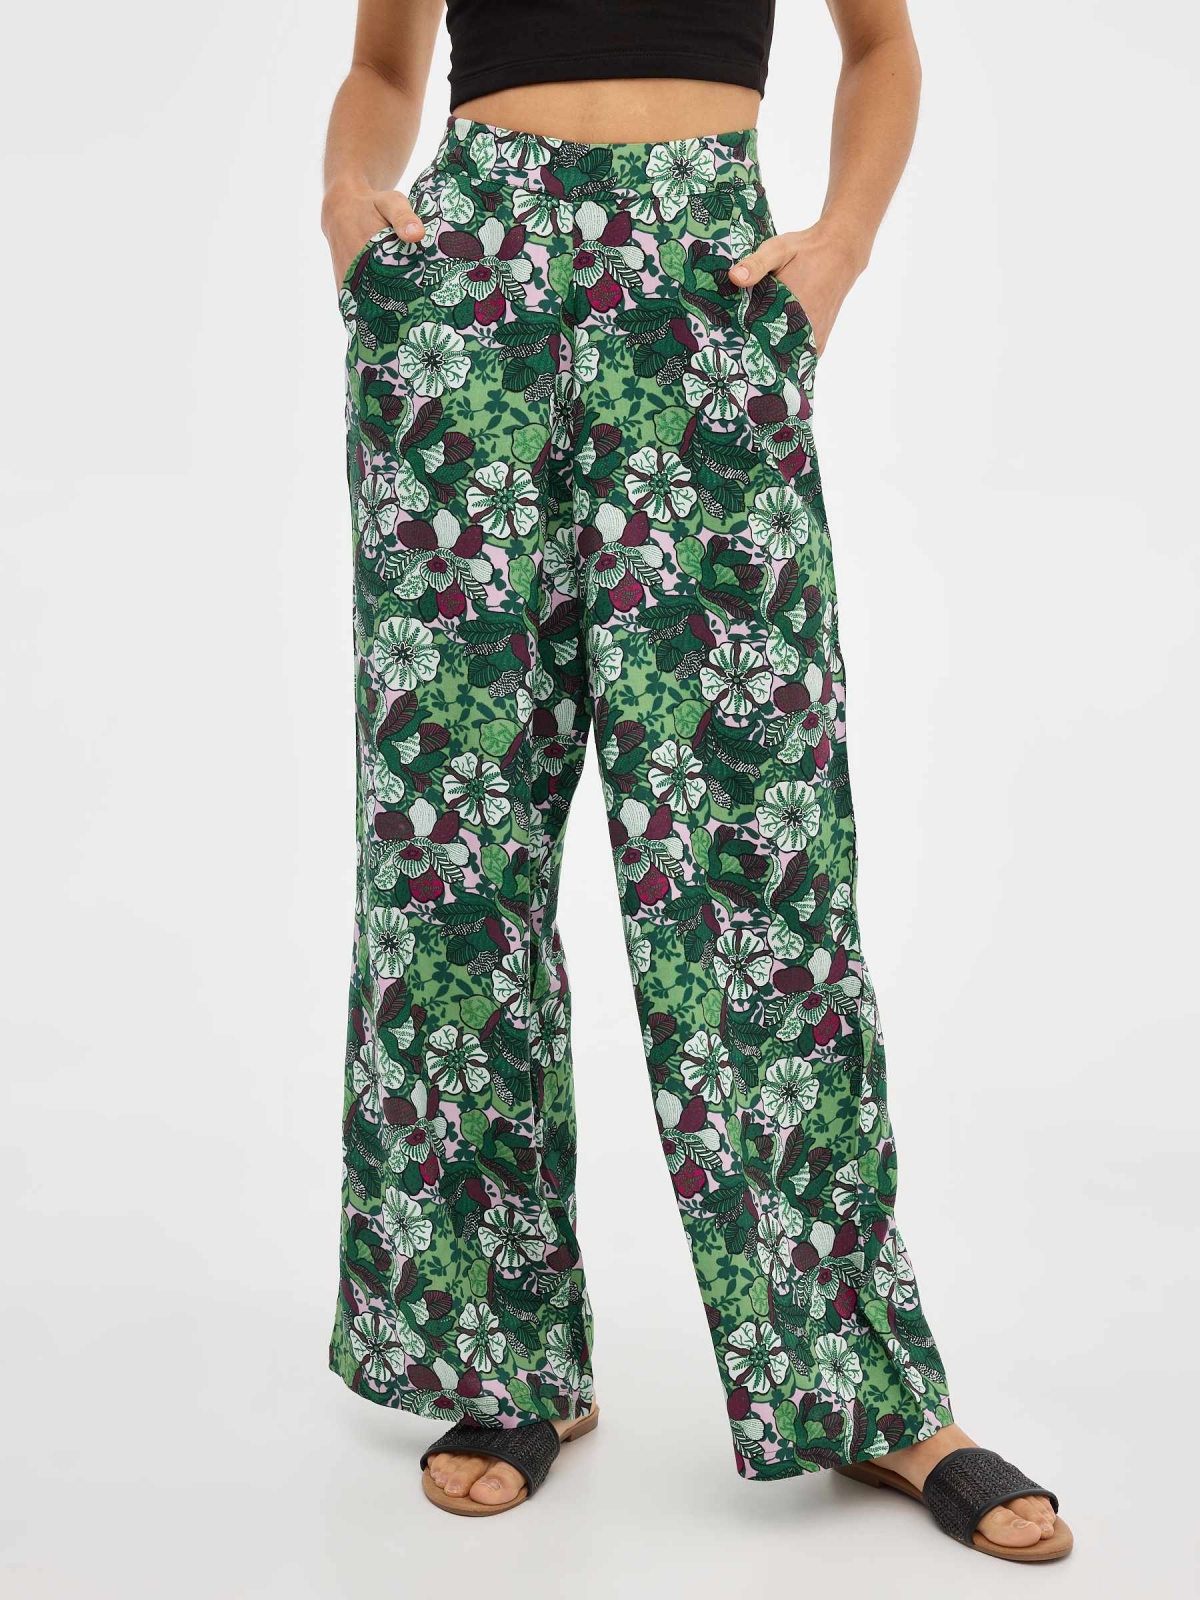 Printed fluid pants mint middle back view